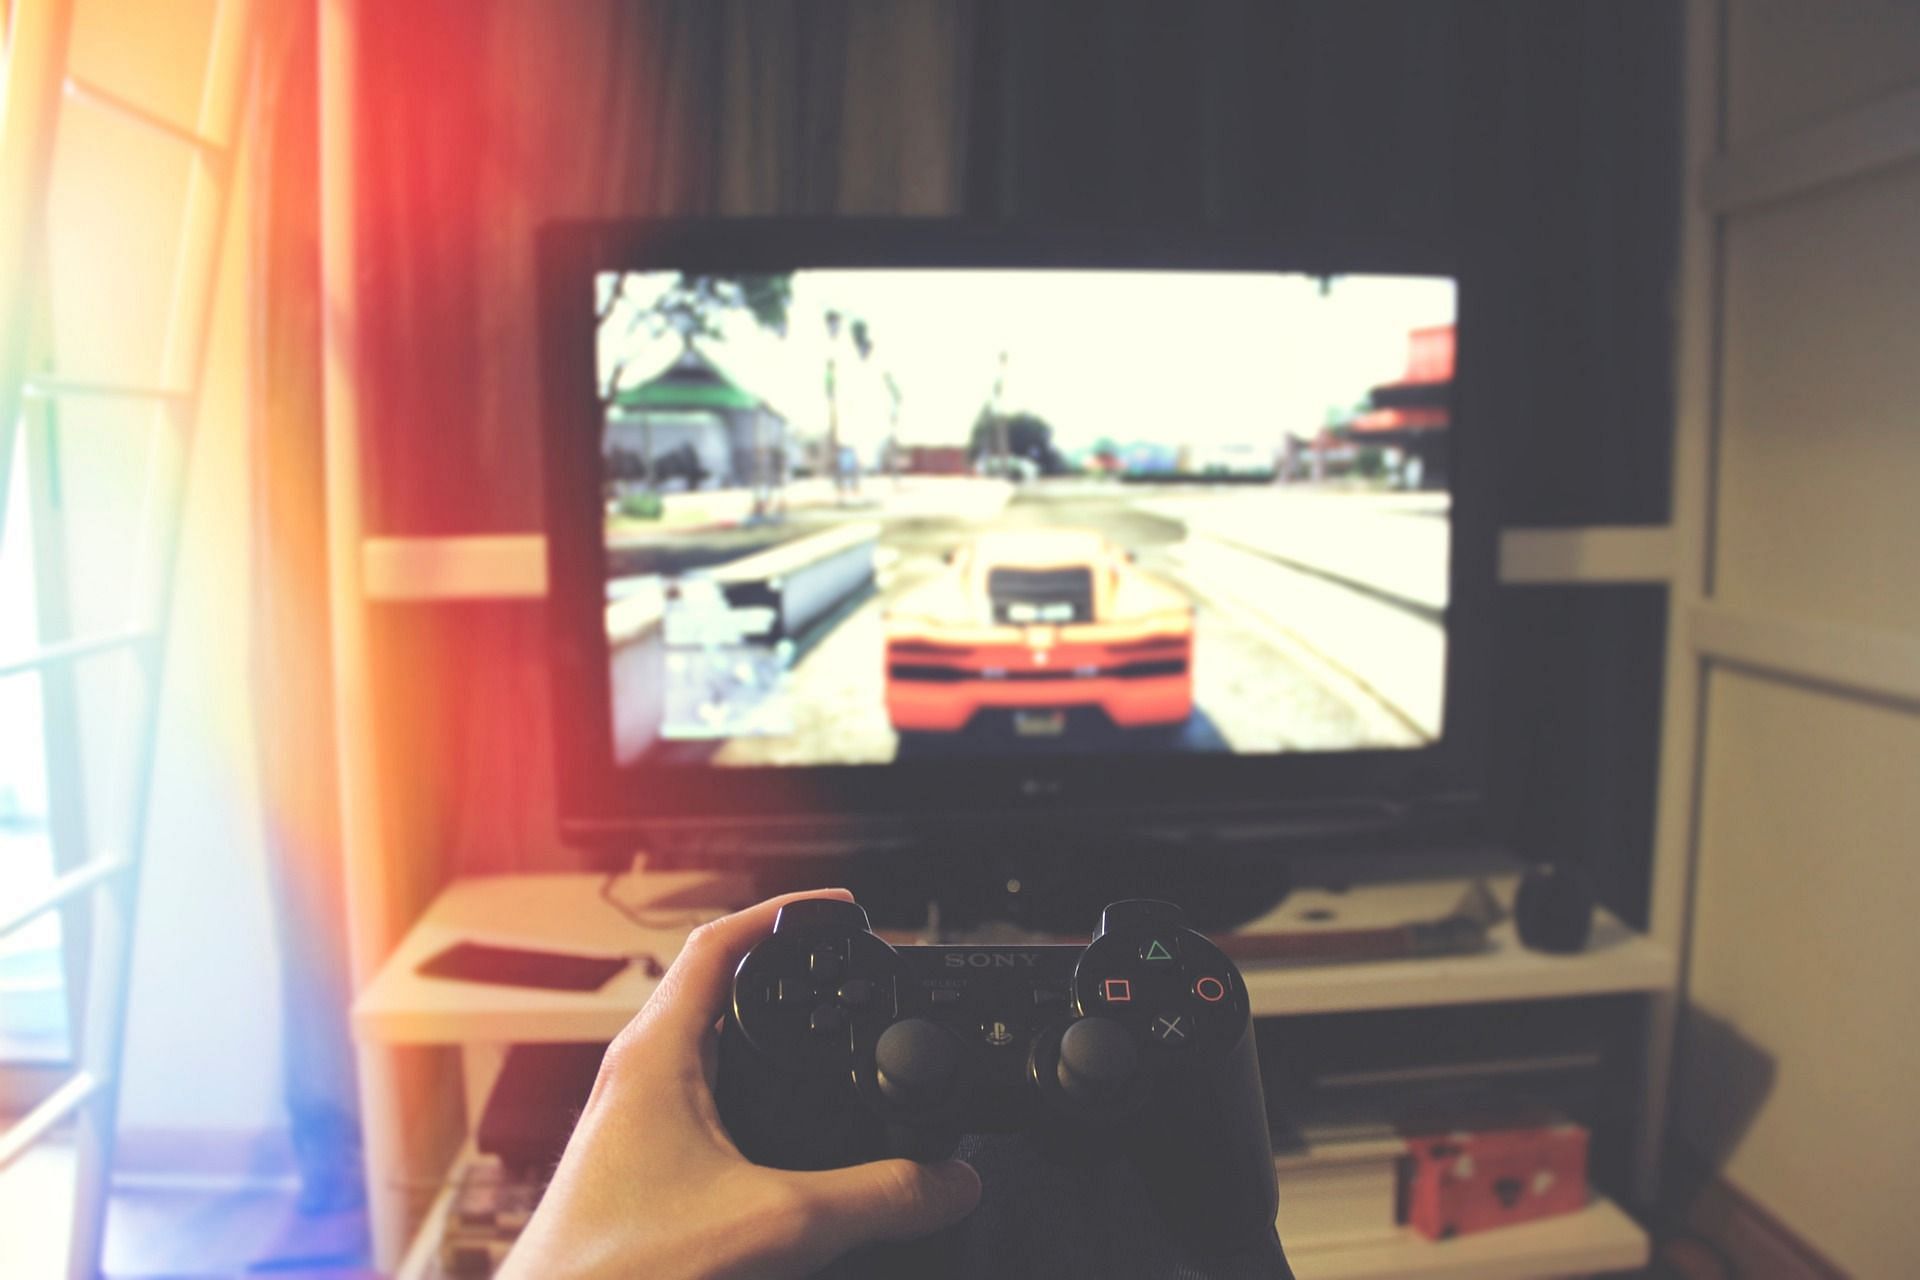 High resolution monitor is what you may need next for enhanced gaming experience (Image via Pixabay)